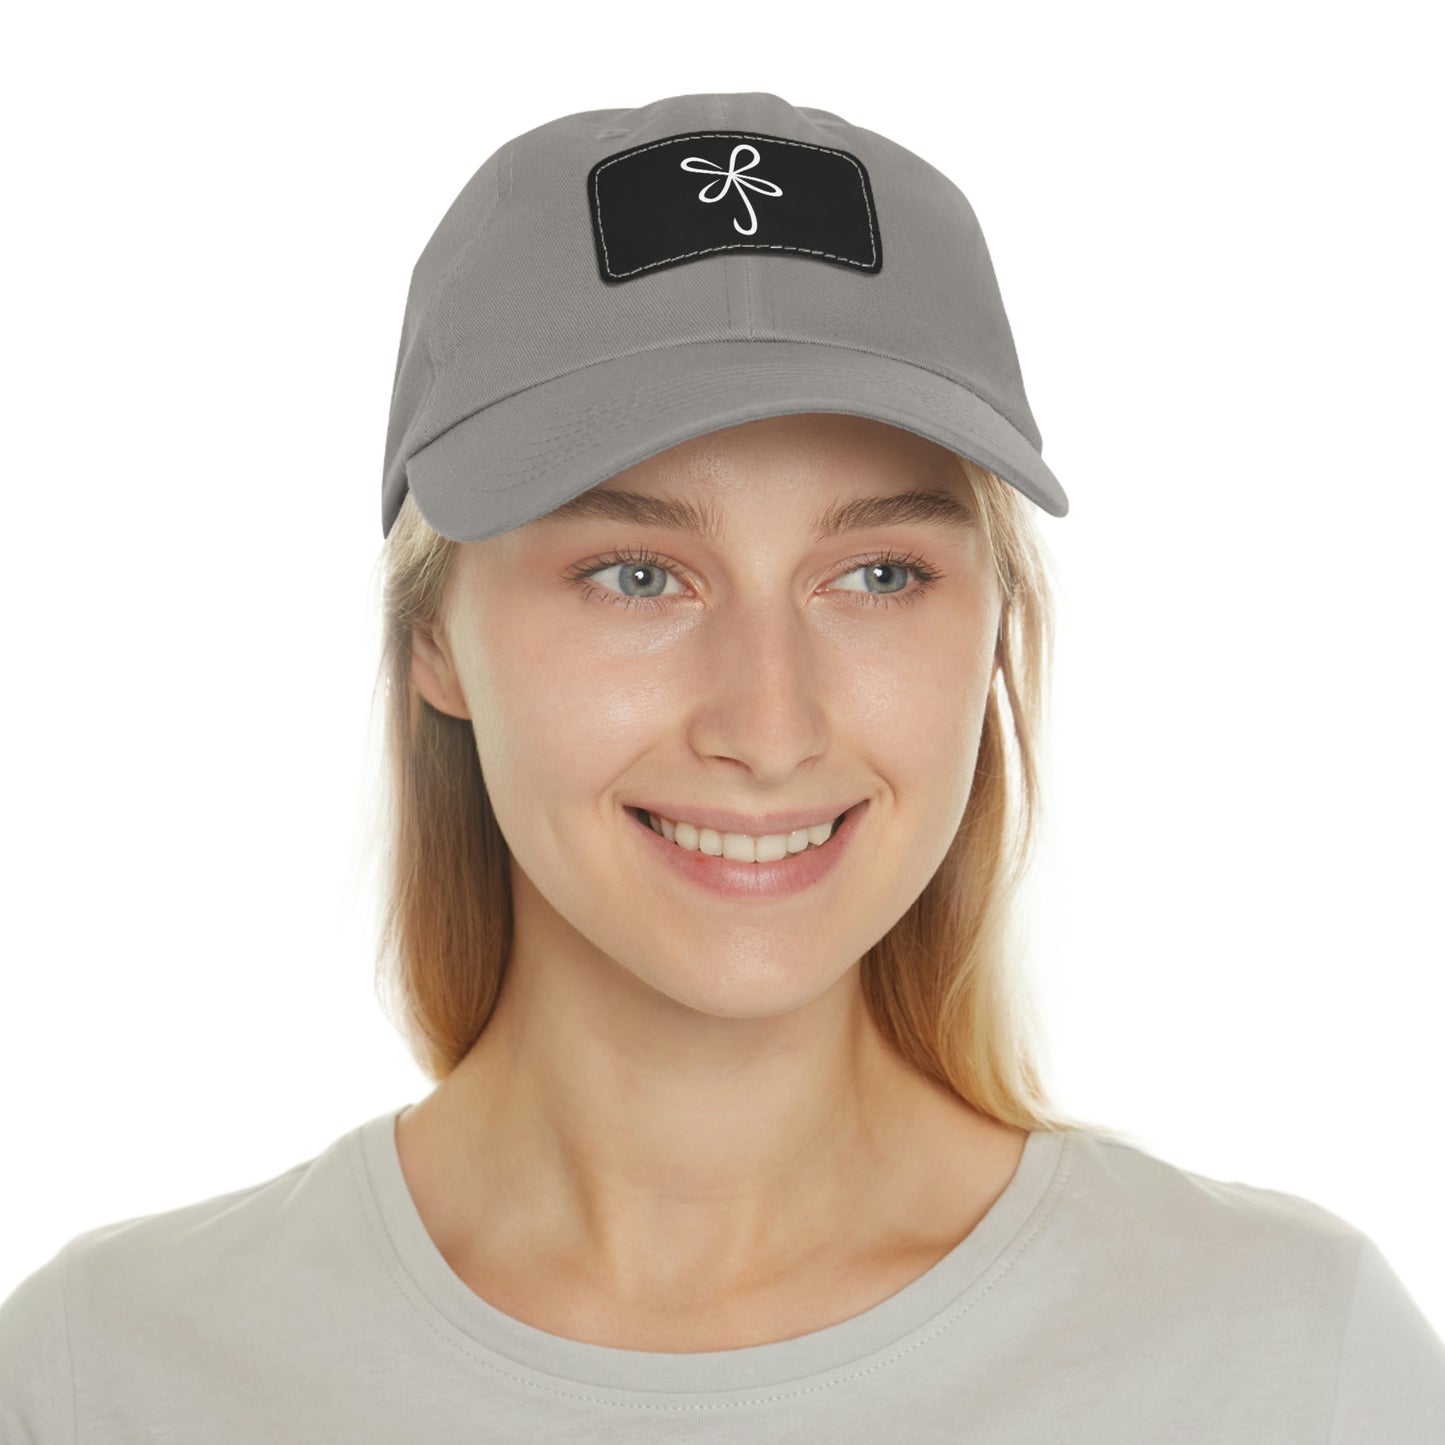 CLVR Logo Low-Slung Ball Cap with Patch